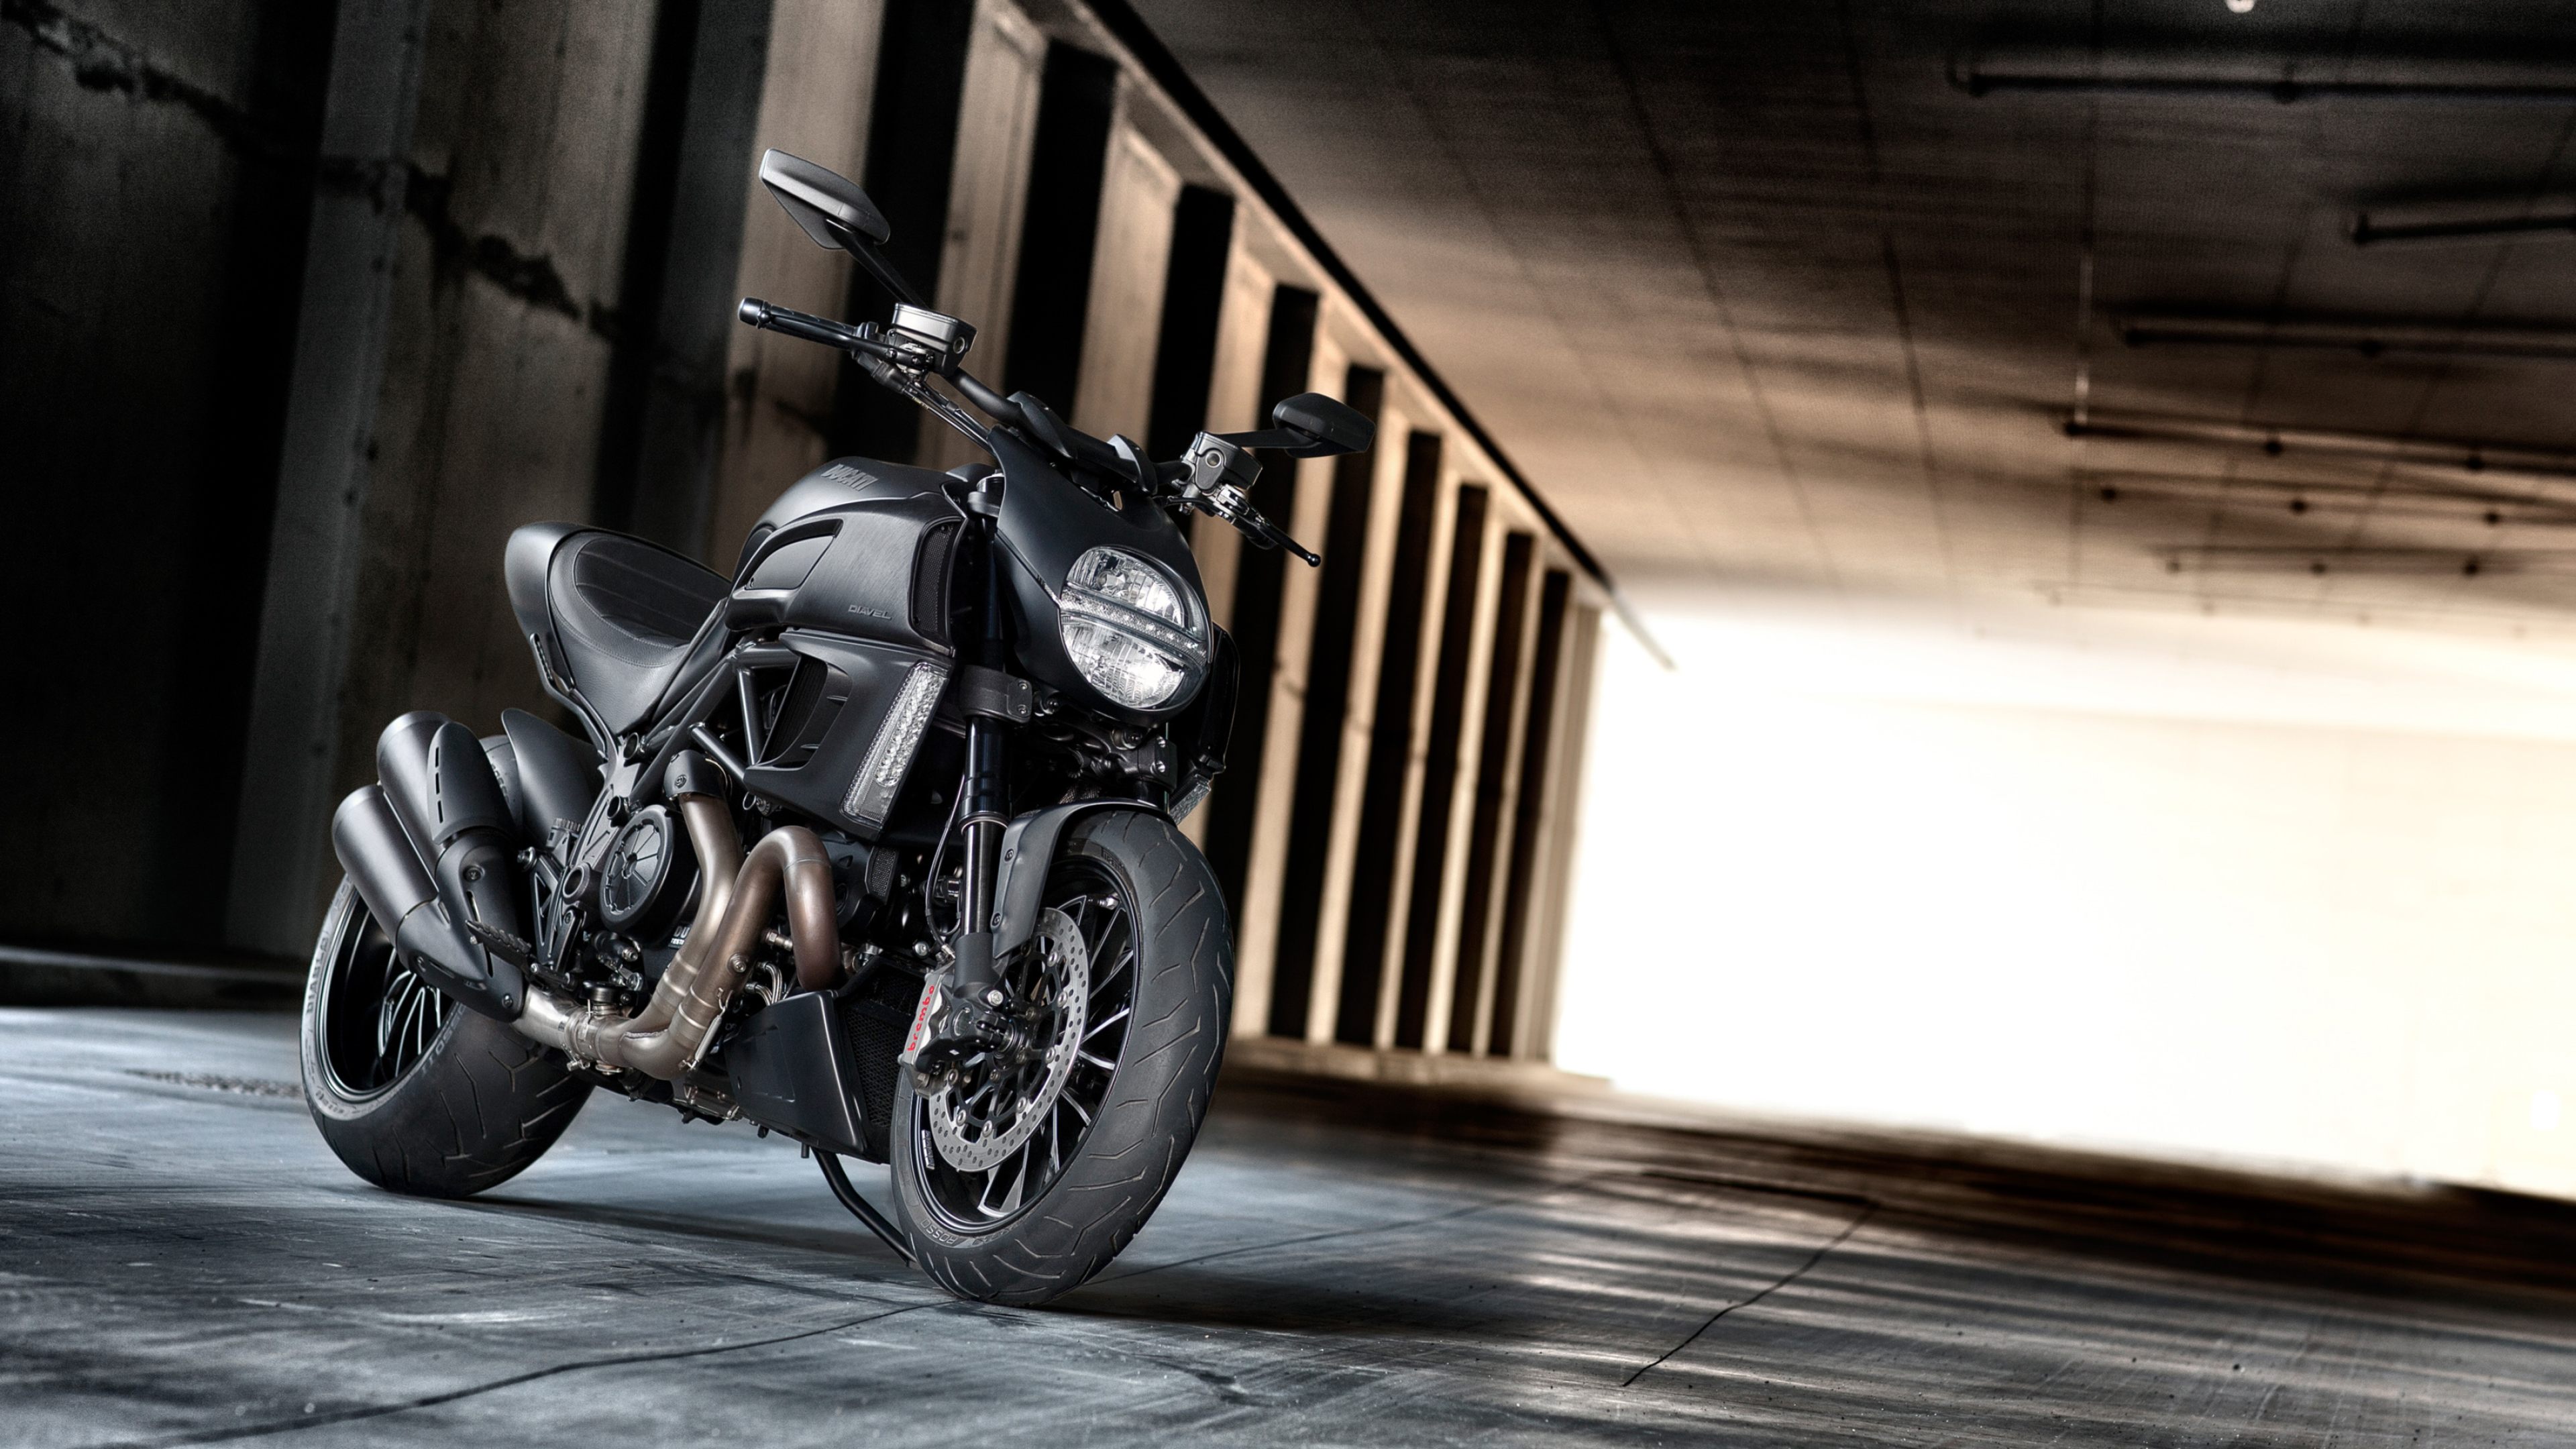 Ducati XDiavel, High-definition wallpapers, Powerful performance, Motorcycle excellence, 3840x2160 4K Desktop